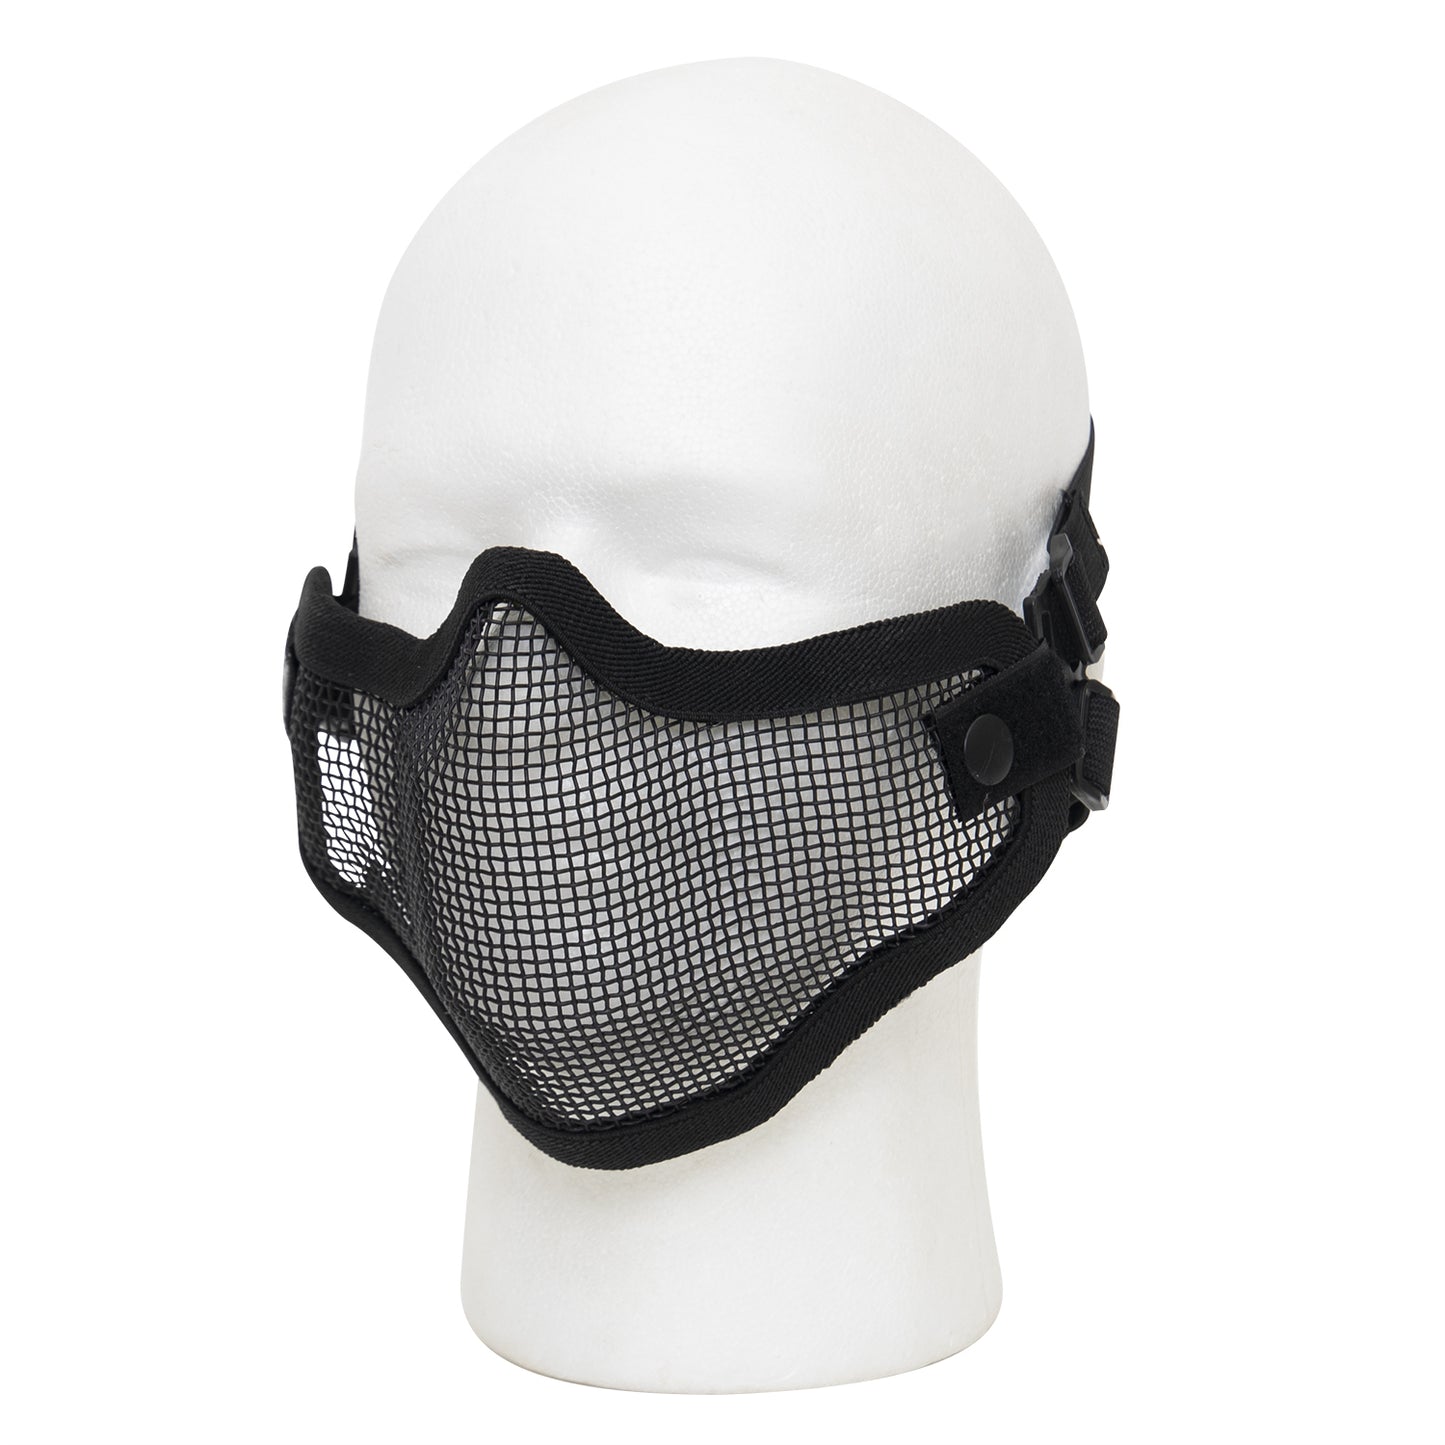 Airsoft Half Tactical Face Mask Carbon Steel Wired Mesh Protection